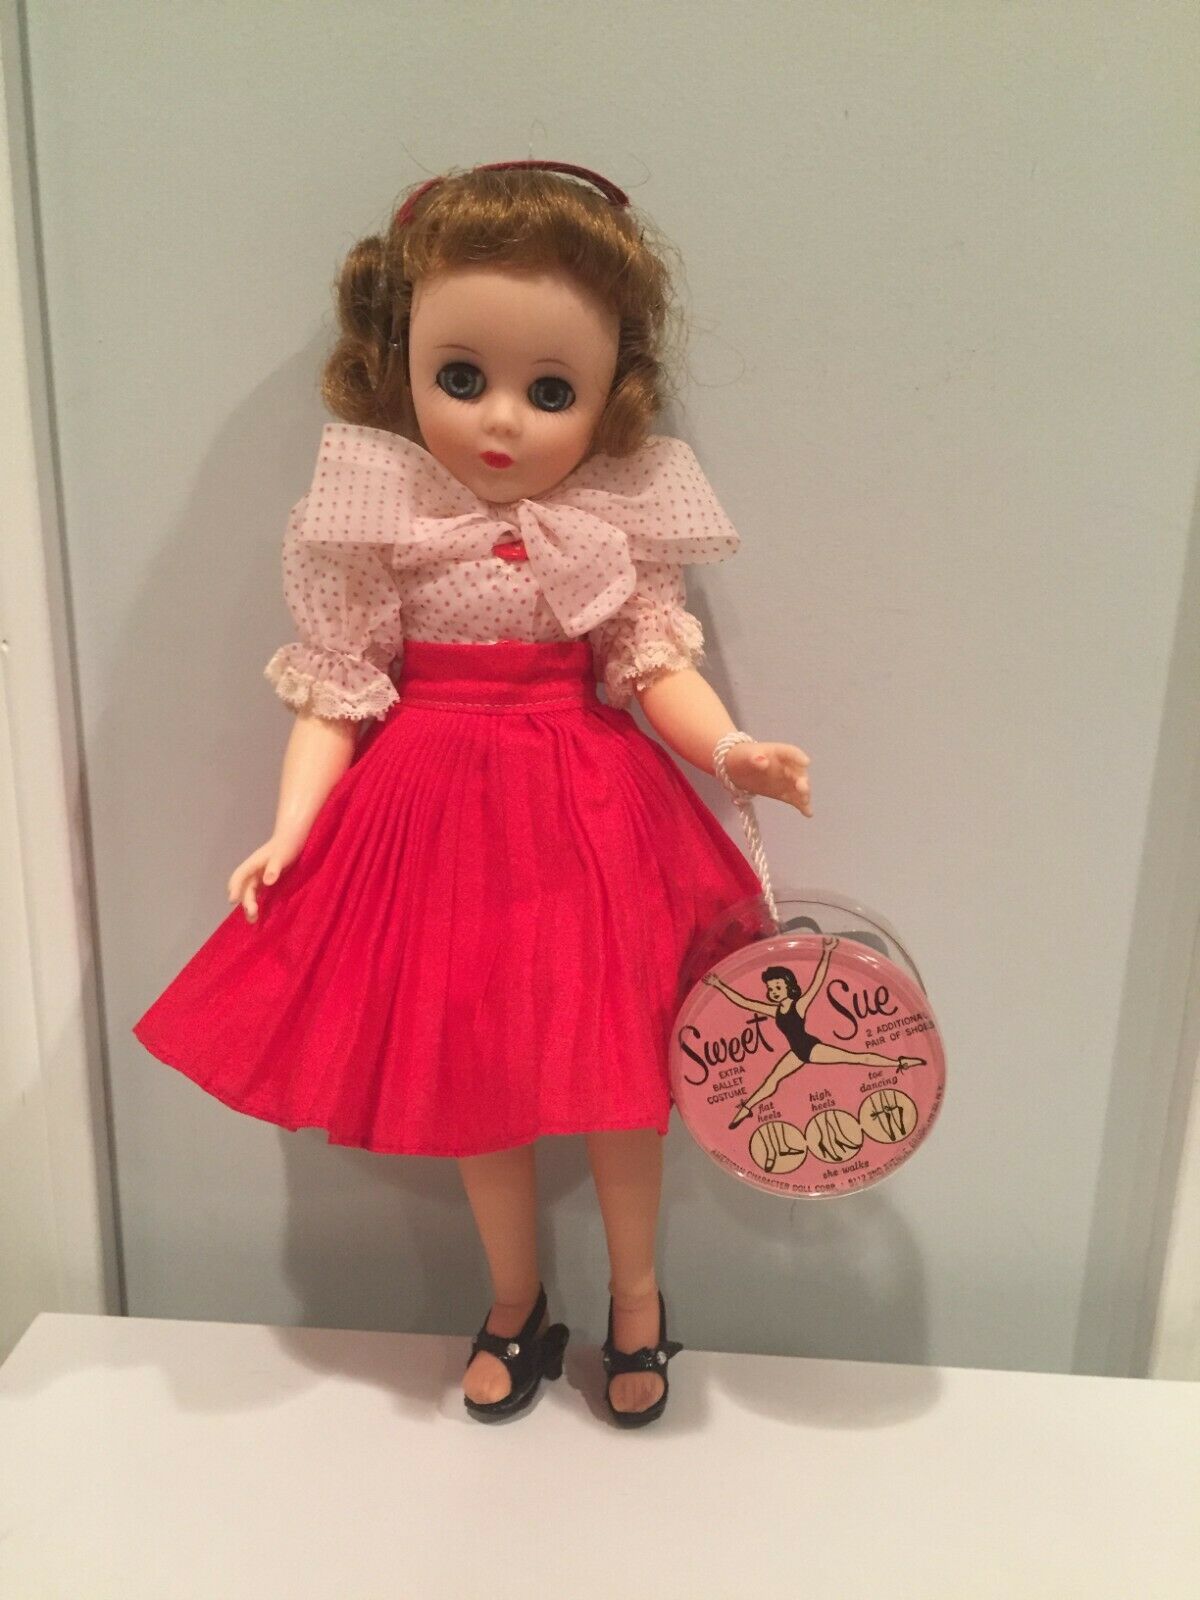 American Character Doll Sweet Sue 13 1/2" In Red Dress W/ White Polka Dot Top